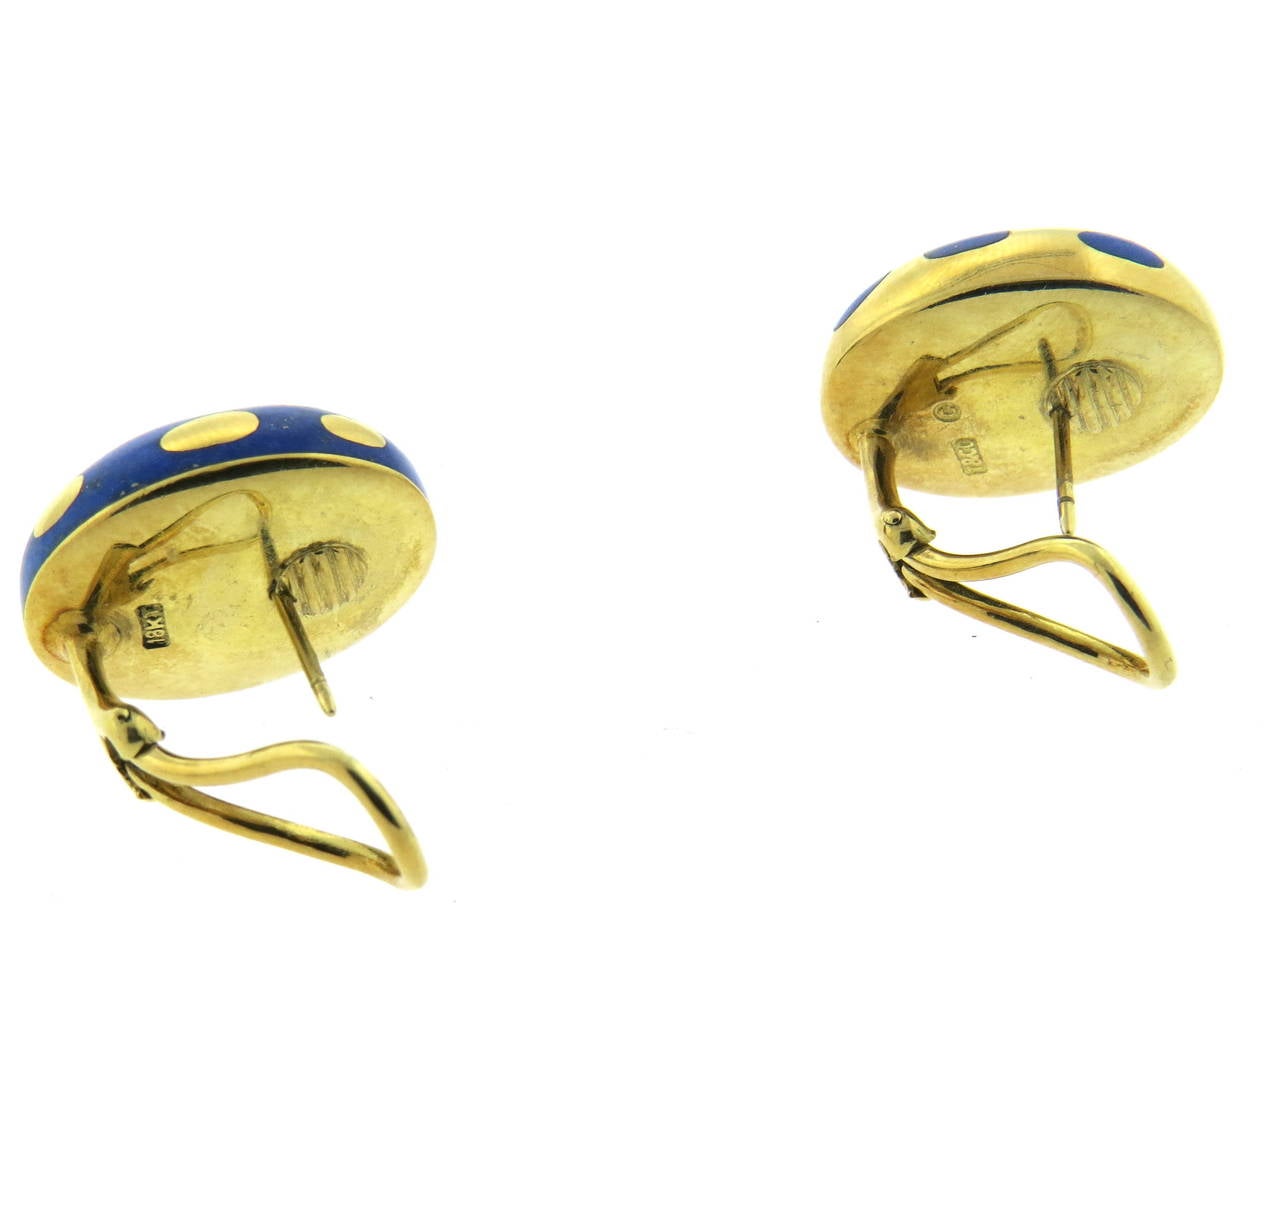 Iconic Positive Negative earrings, crafted by Tiffany & Co, set in 18k gold with lapis lazuli inlay. Earrings measure 21mm x 19mm. Marked T & Co,18k. Weight - 19.5 grams